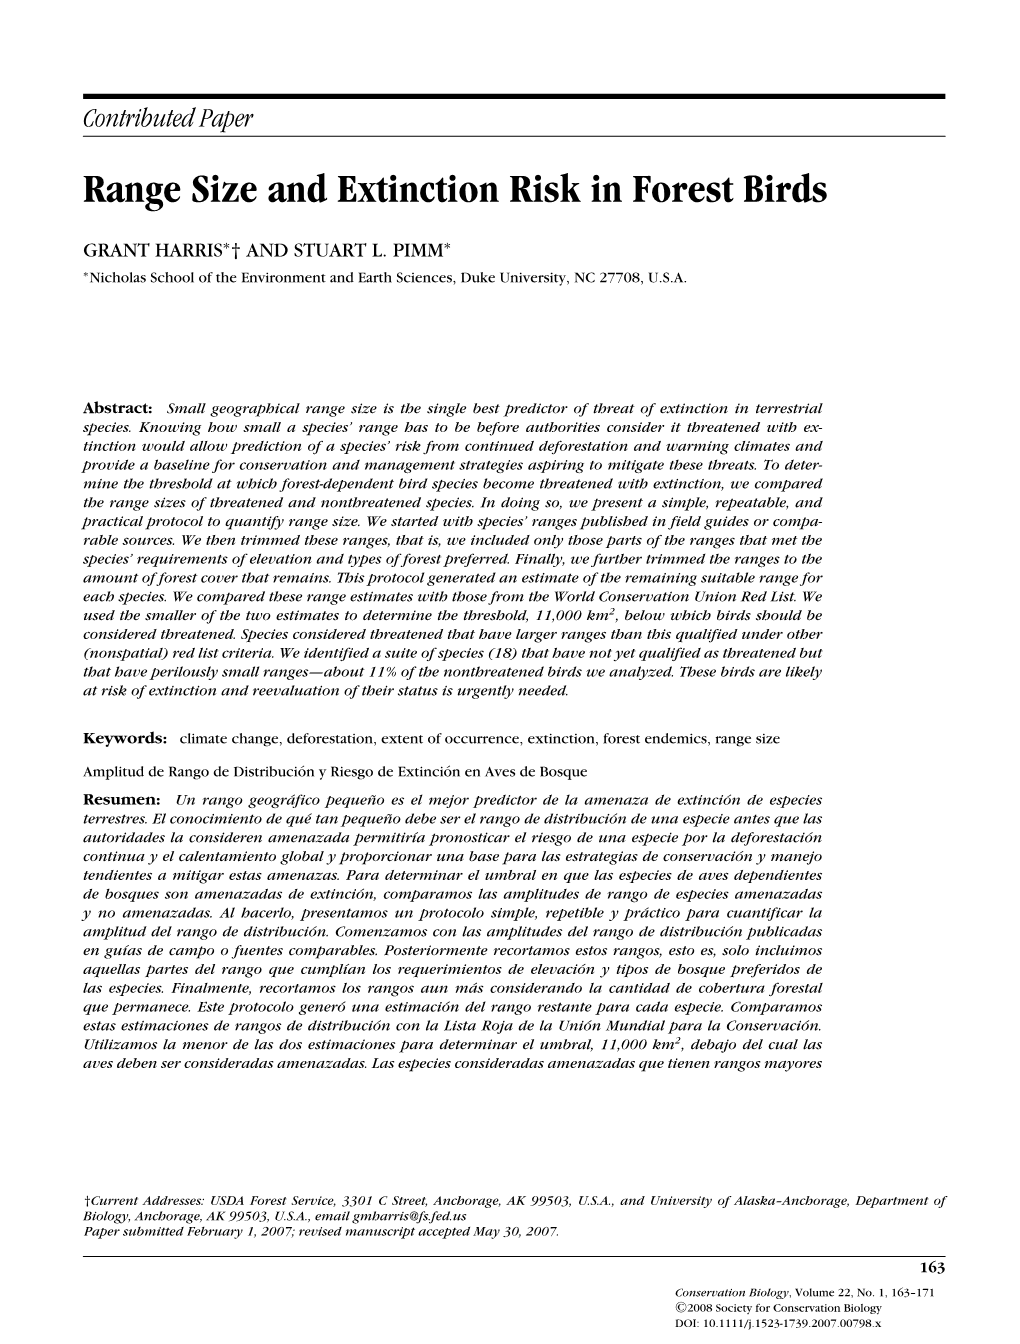 Range Size and Extinction Risk in Forest Birds